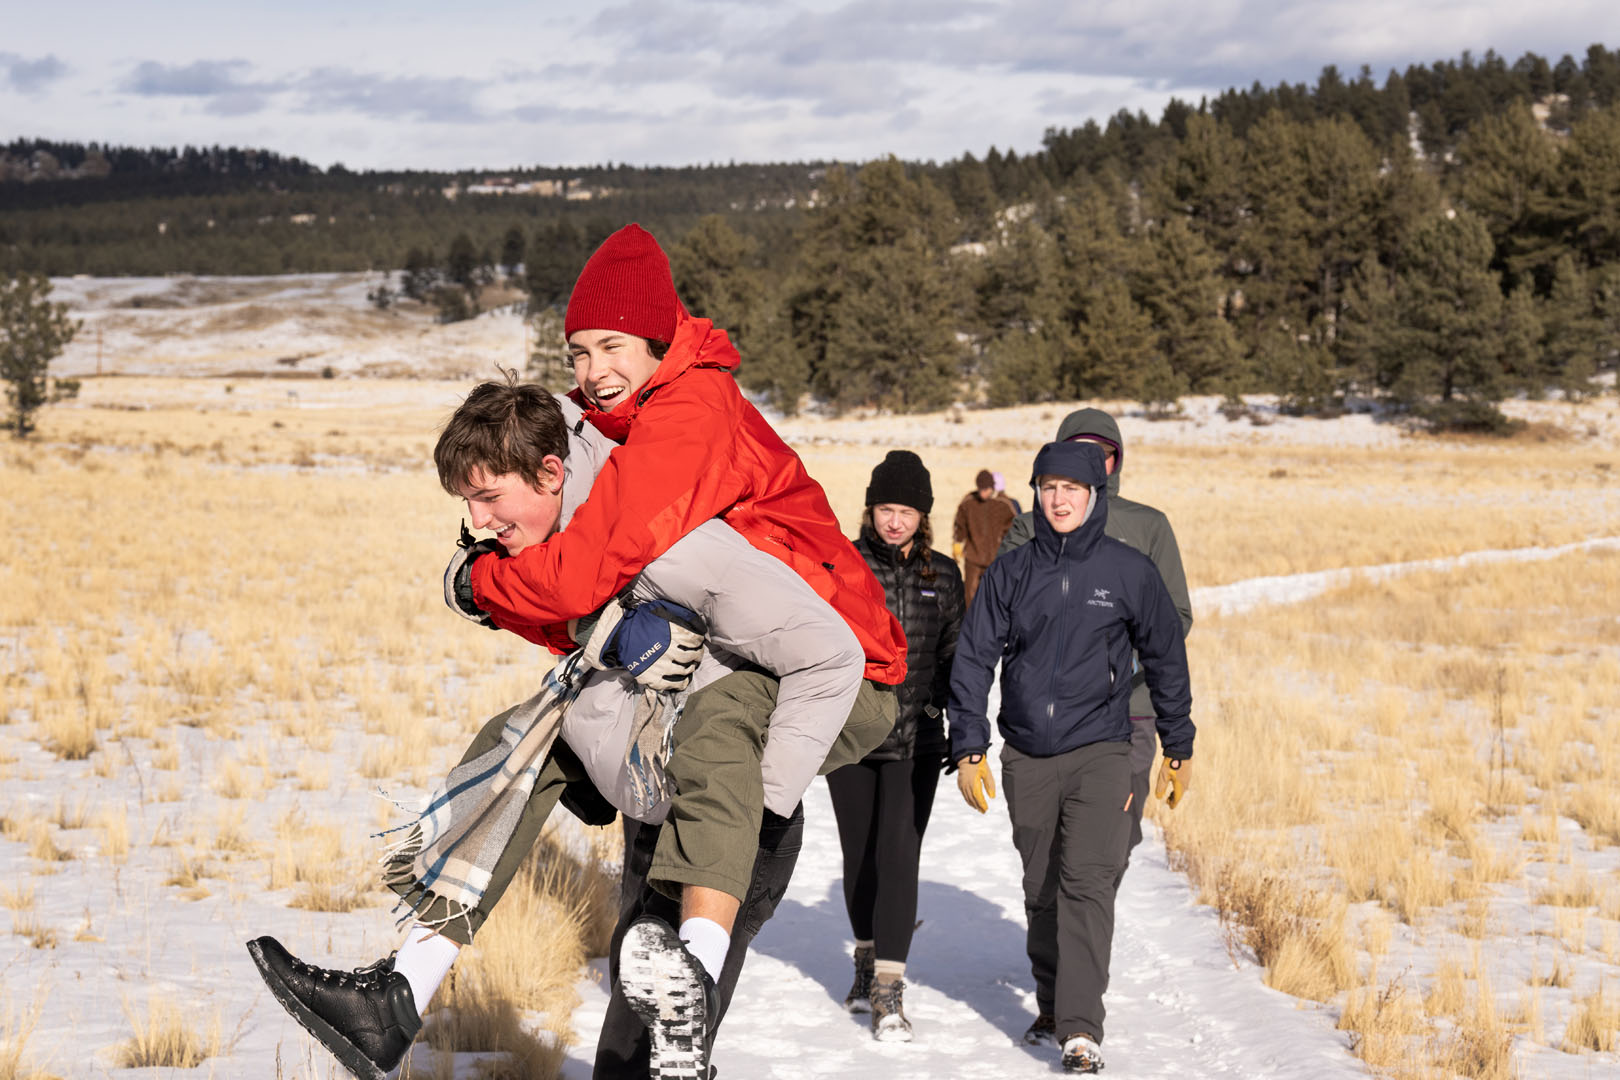 Nate Watson '26 is pictured being carried by Francis Black '26 during their WSO Priddy Experience group exploration of the Florissant Fossil Beds in the Rocky Mountain Southwest on Jan. 27, 2023. Photo by Lonnie Timmons III / Colorado College.